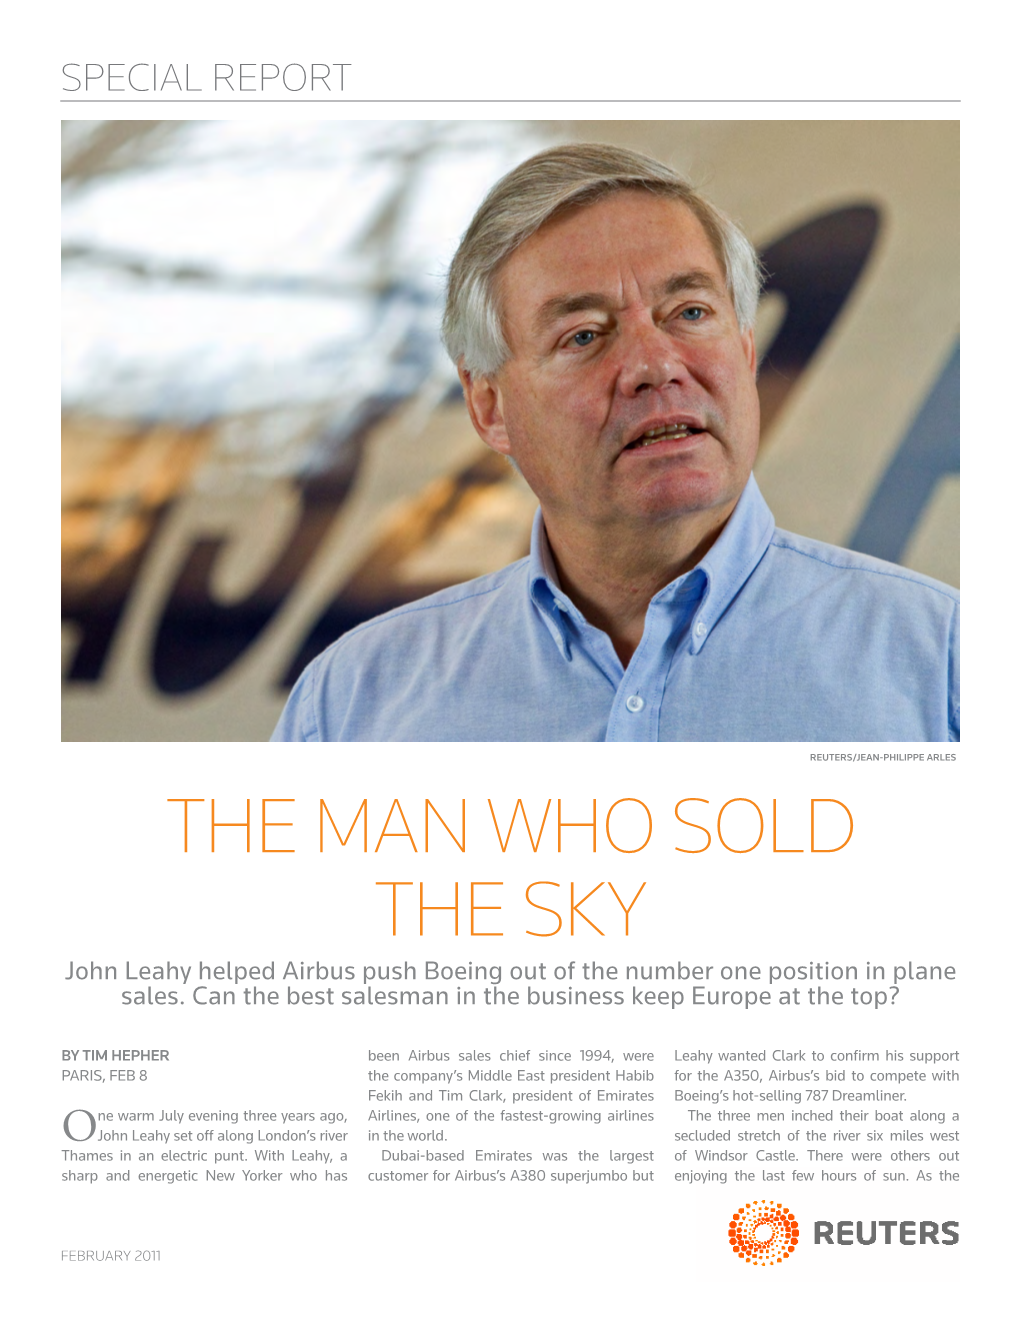 The Man Who Sold the Sky John Leahy Helped Airbus Push Boeing out of the Number One Position in Plane Sales